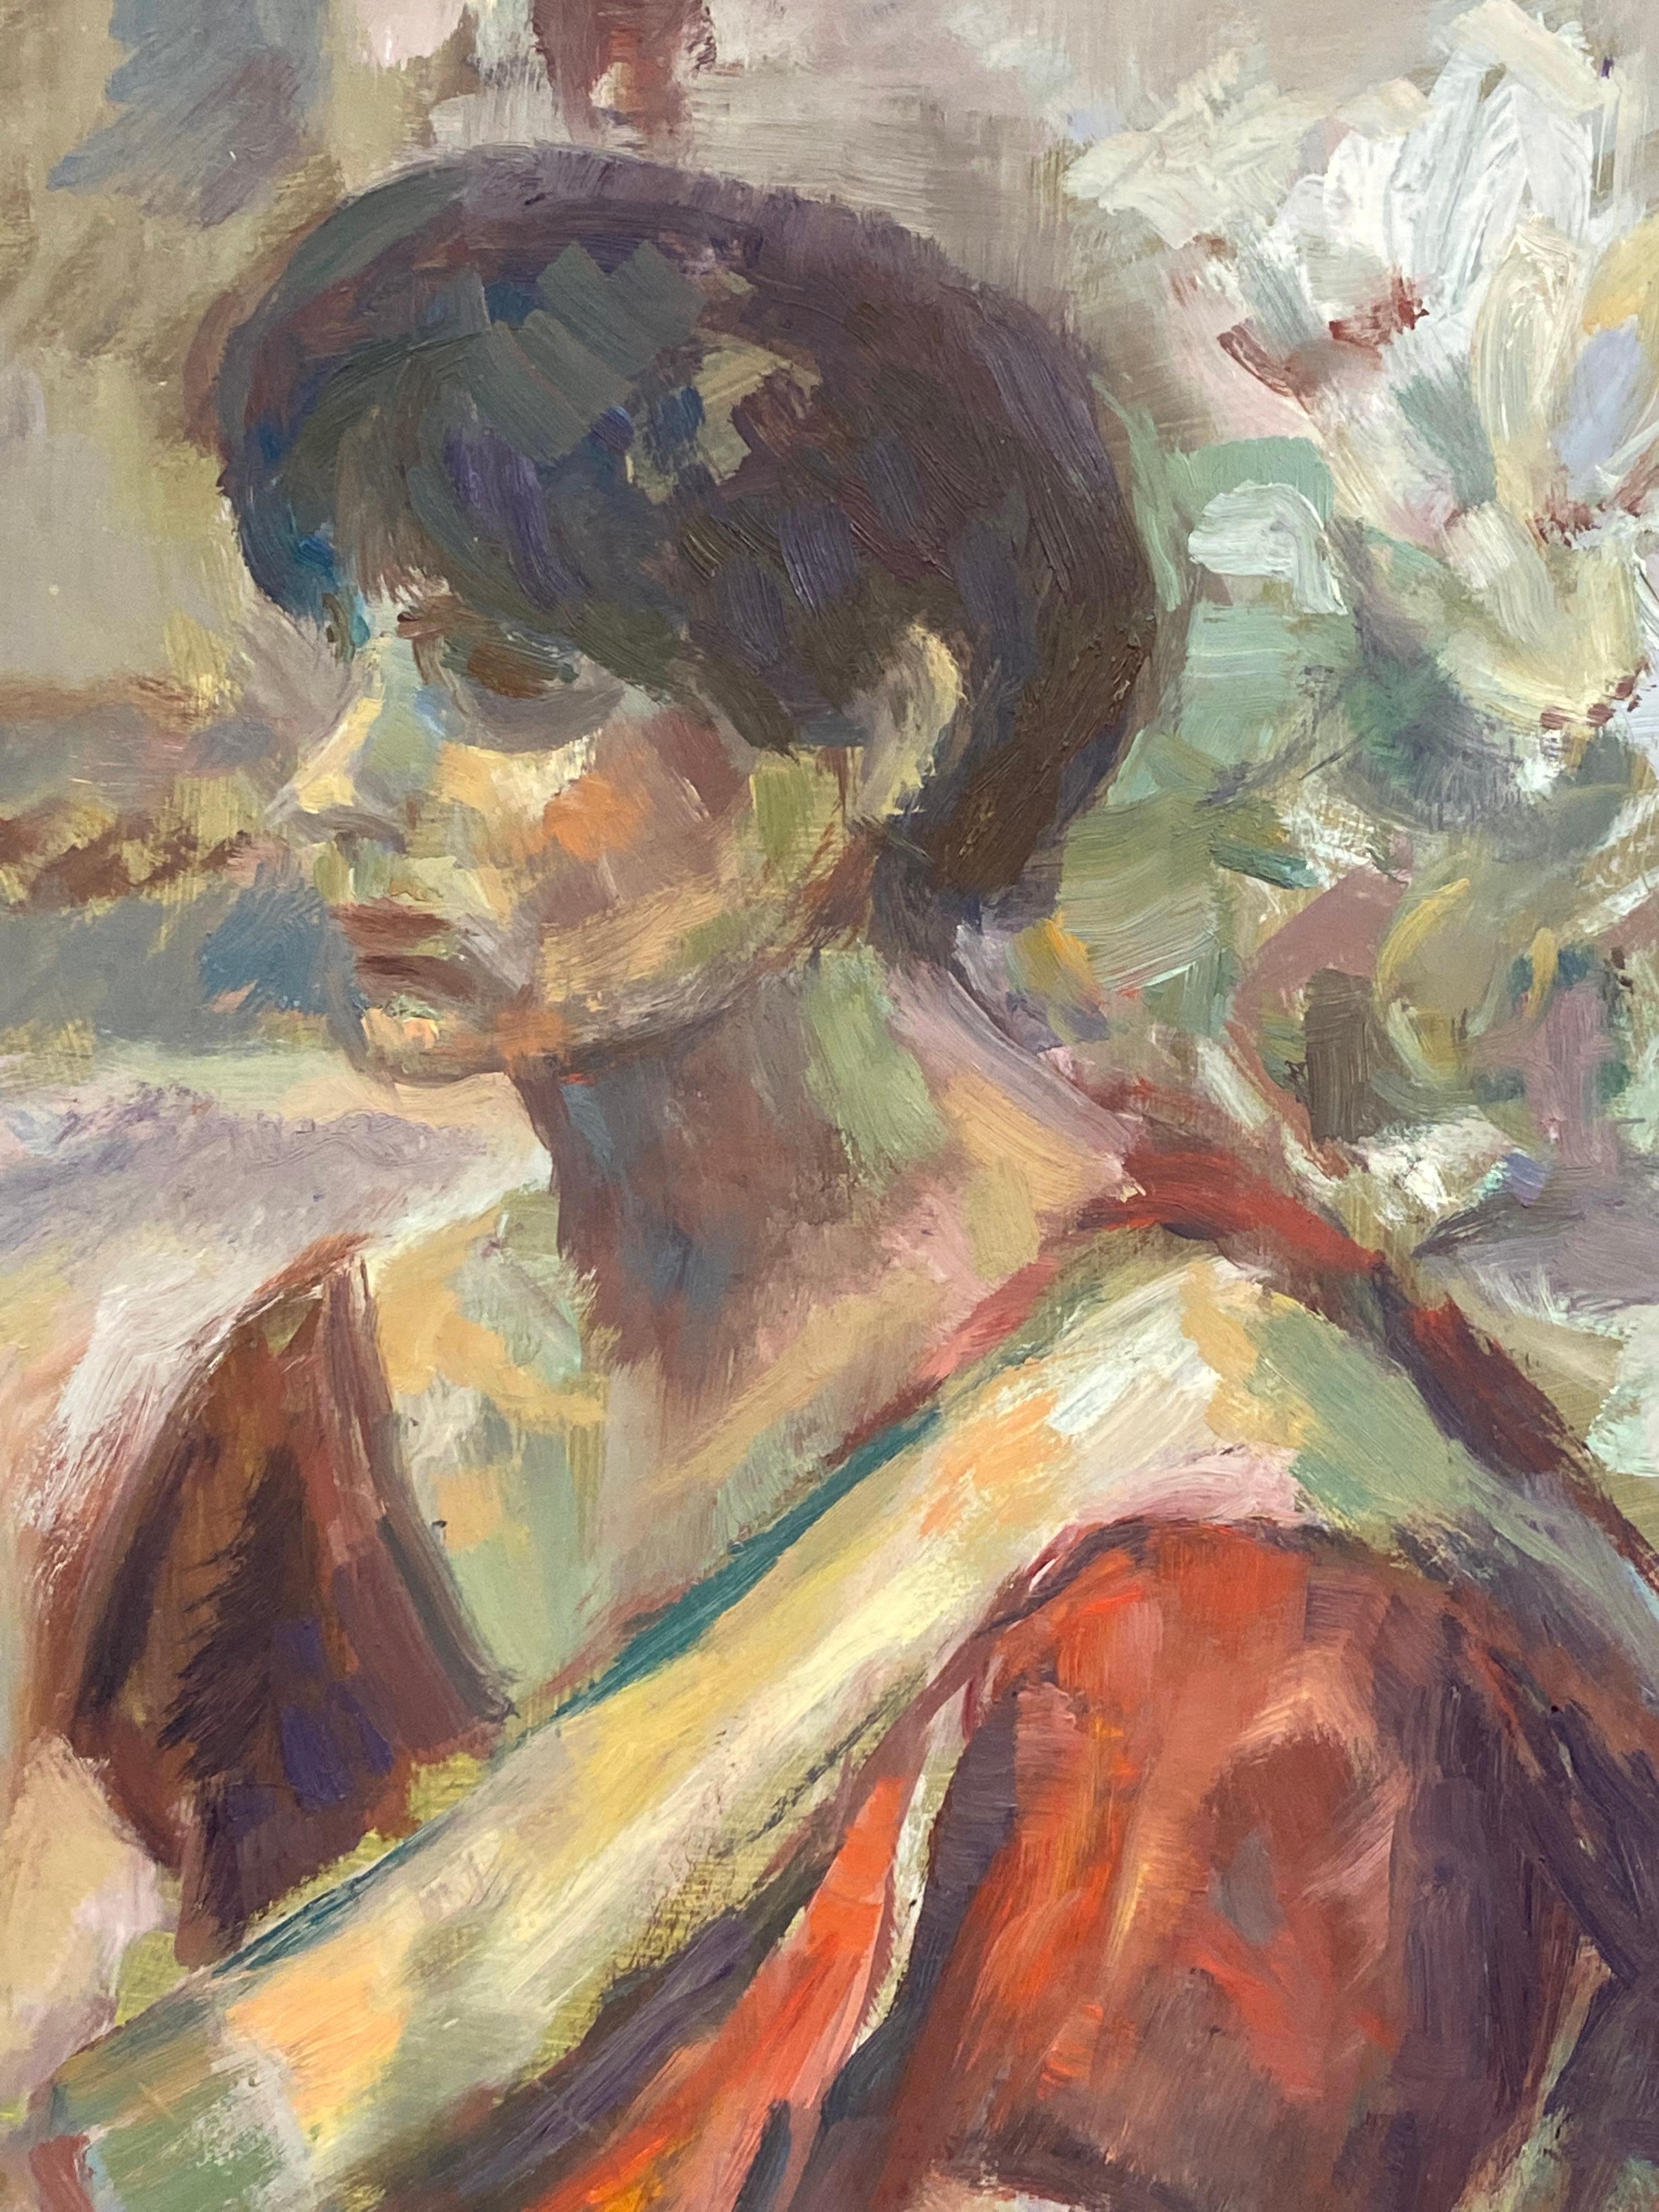 Artist: Beryl Darton (British circa 1960's)

Period: mid 20th century/ 1960's

Medium: oil painting on board, unframed

Size: 24 x 24 inches

Condition: overall very good, a very few light scuffs to the surface but nothing really detrimental to the